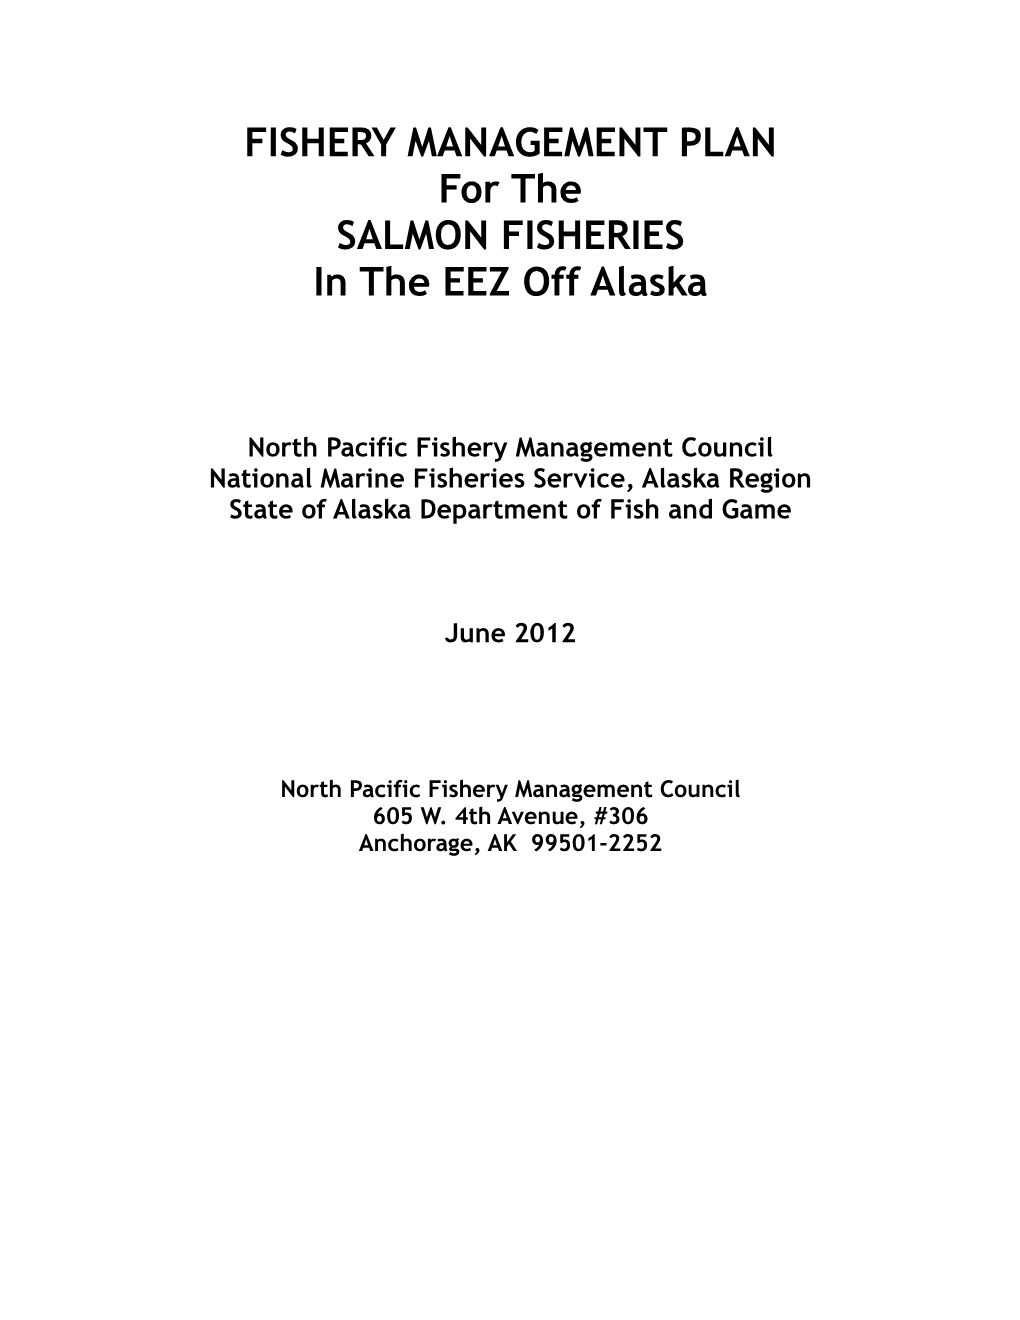 FISHERY MANAGEMENT PLAN for the SALMON FISHERIES in the EEZ Off Alaska